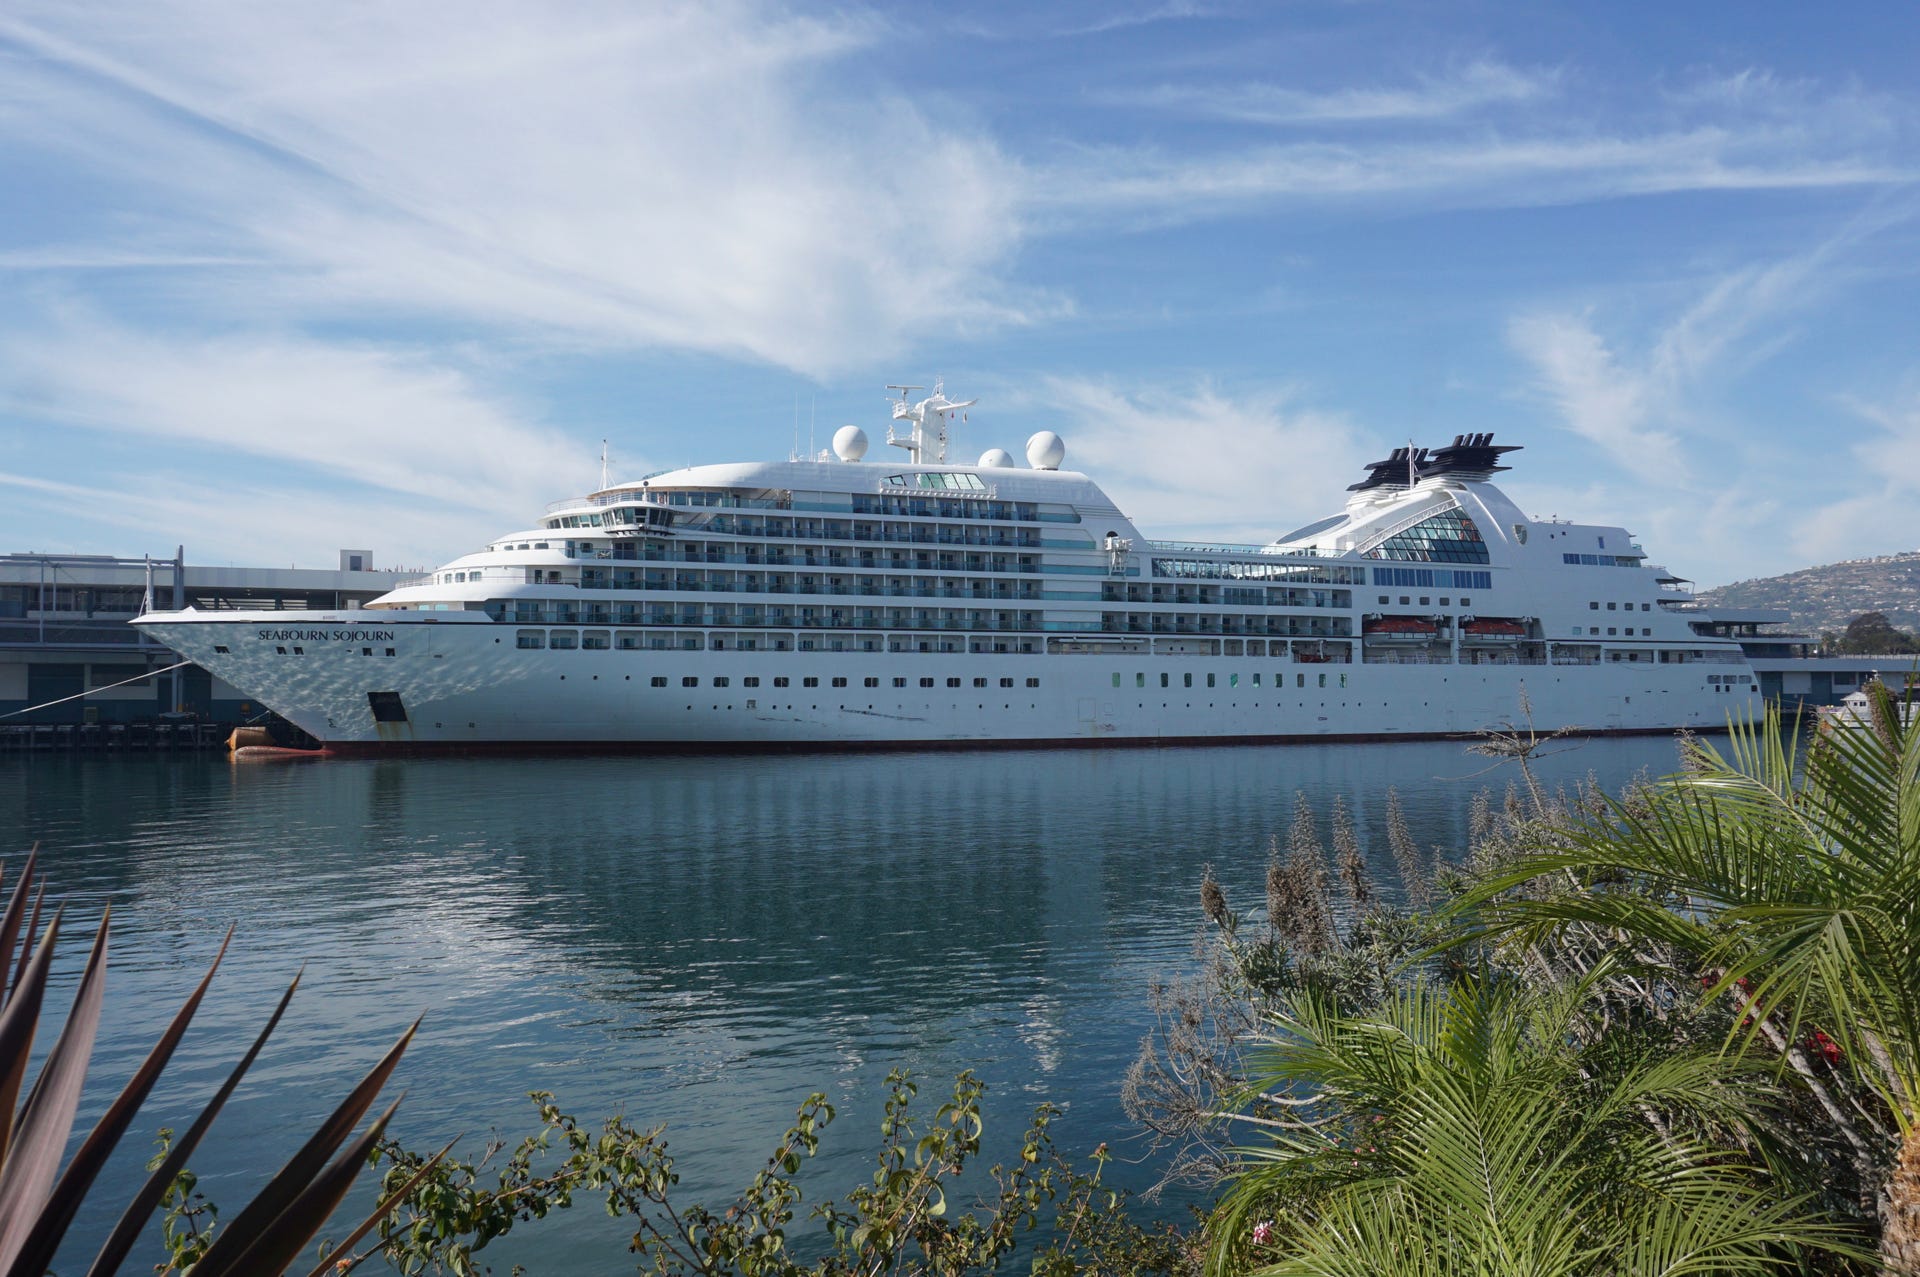 seabourn cruises is owned by